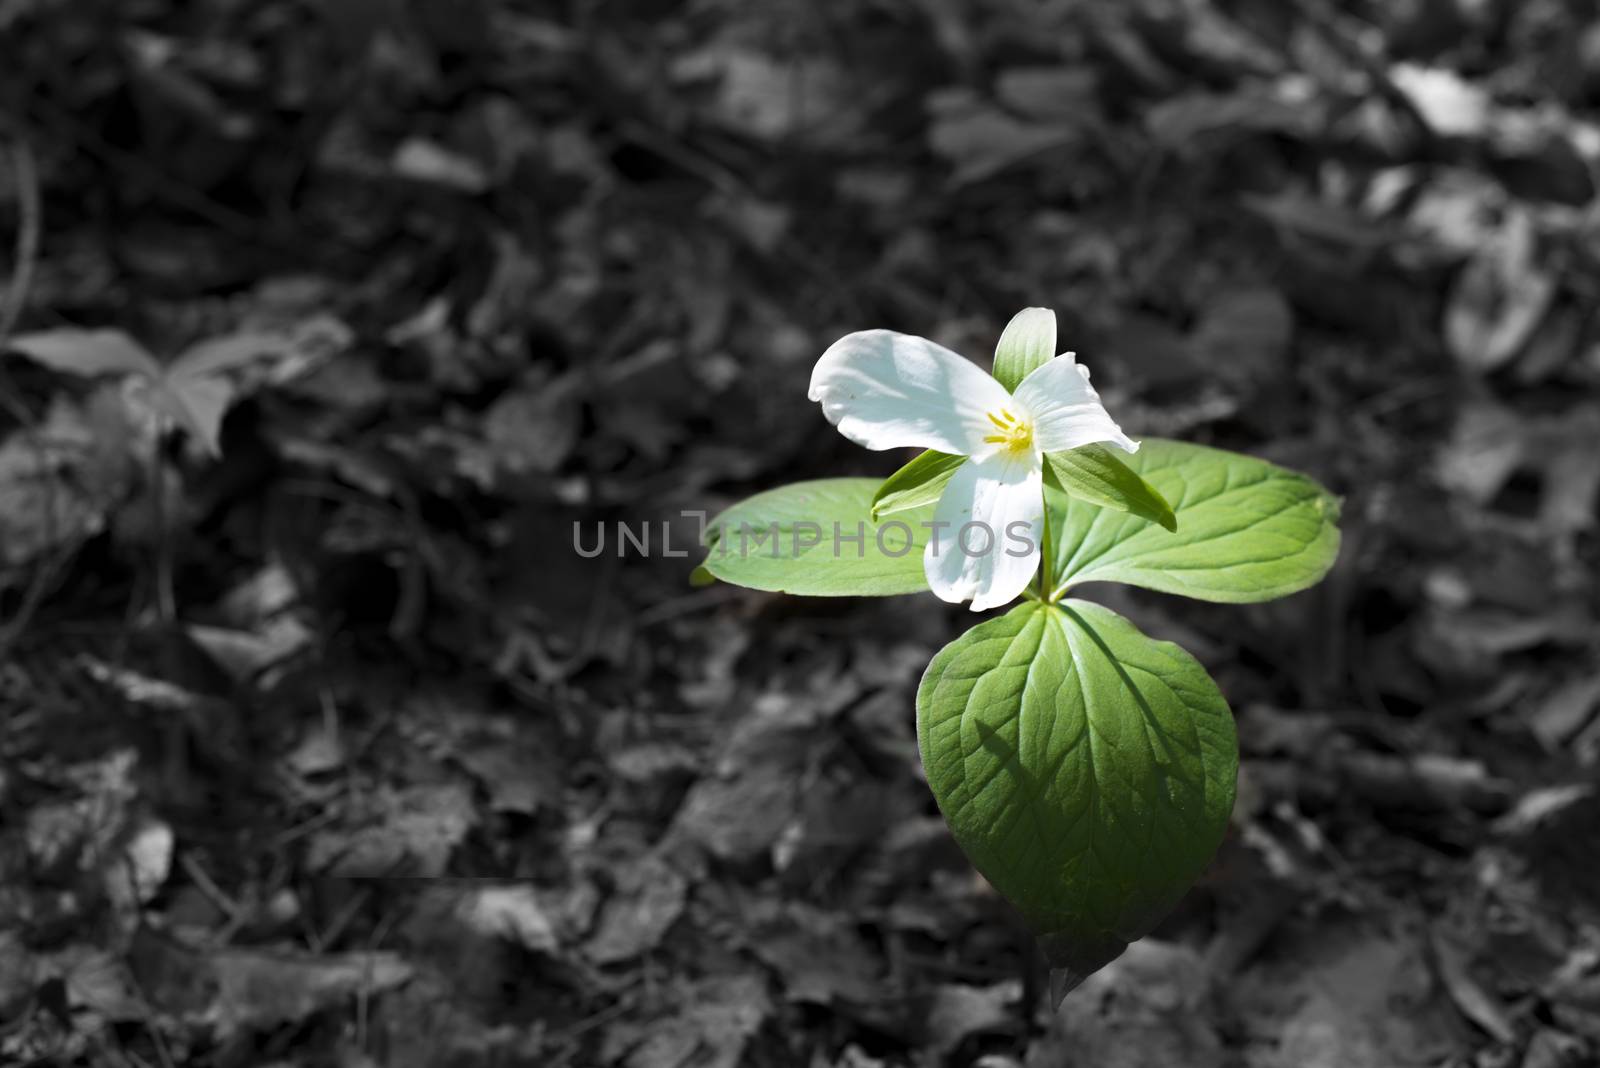 White trillium flower growing in the forrest